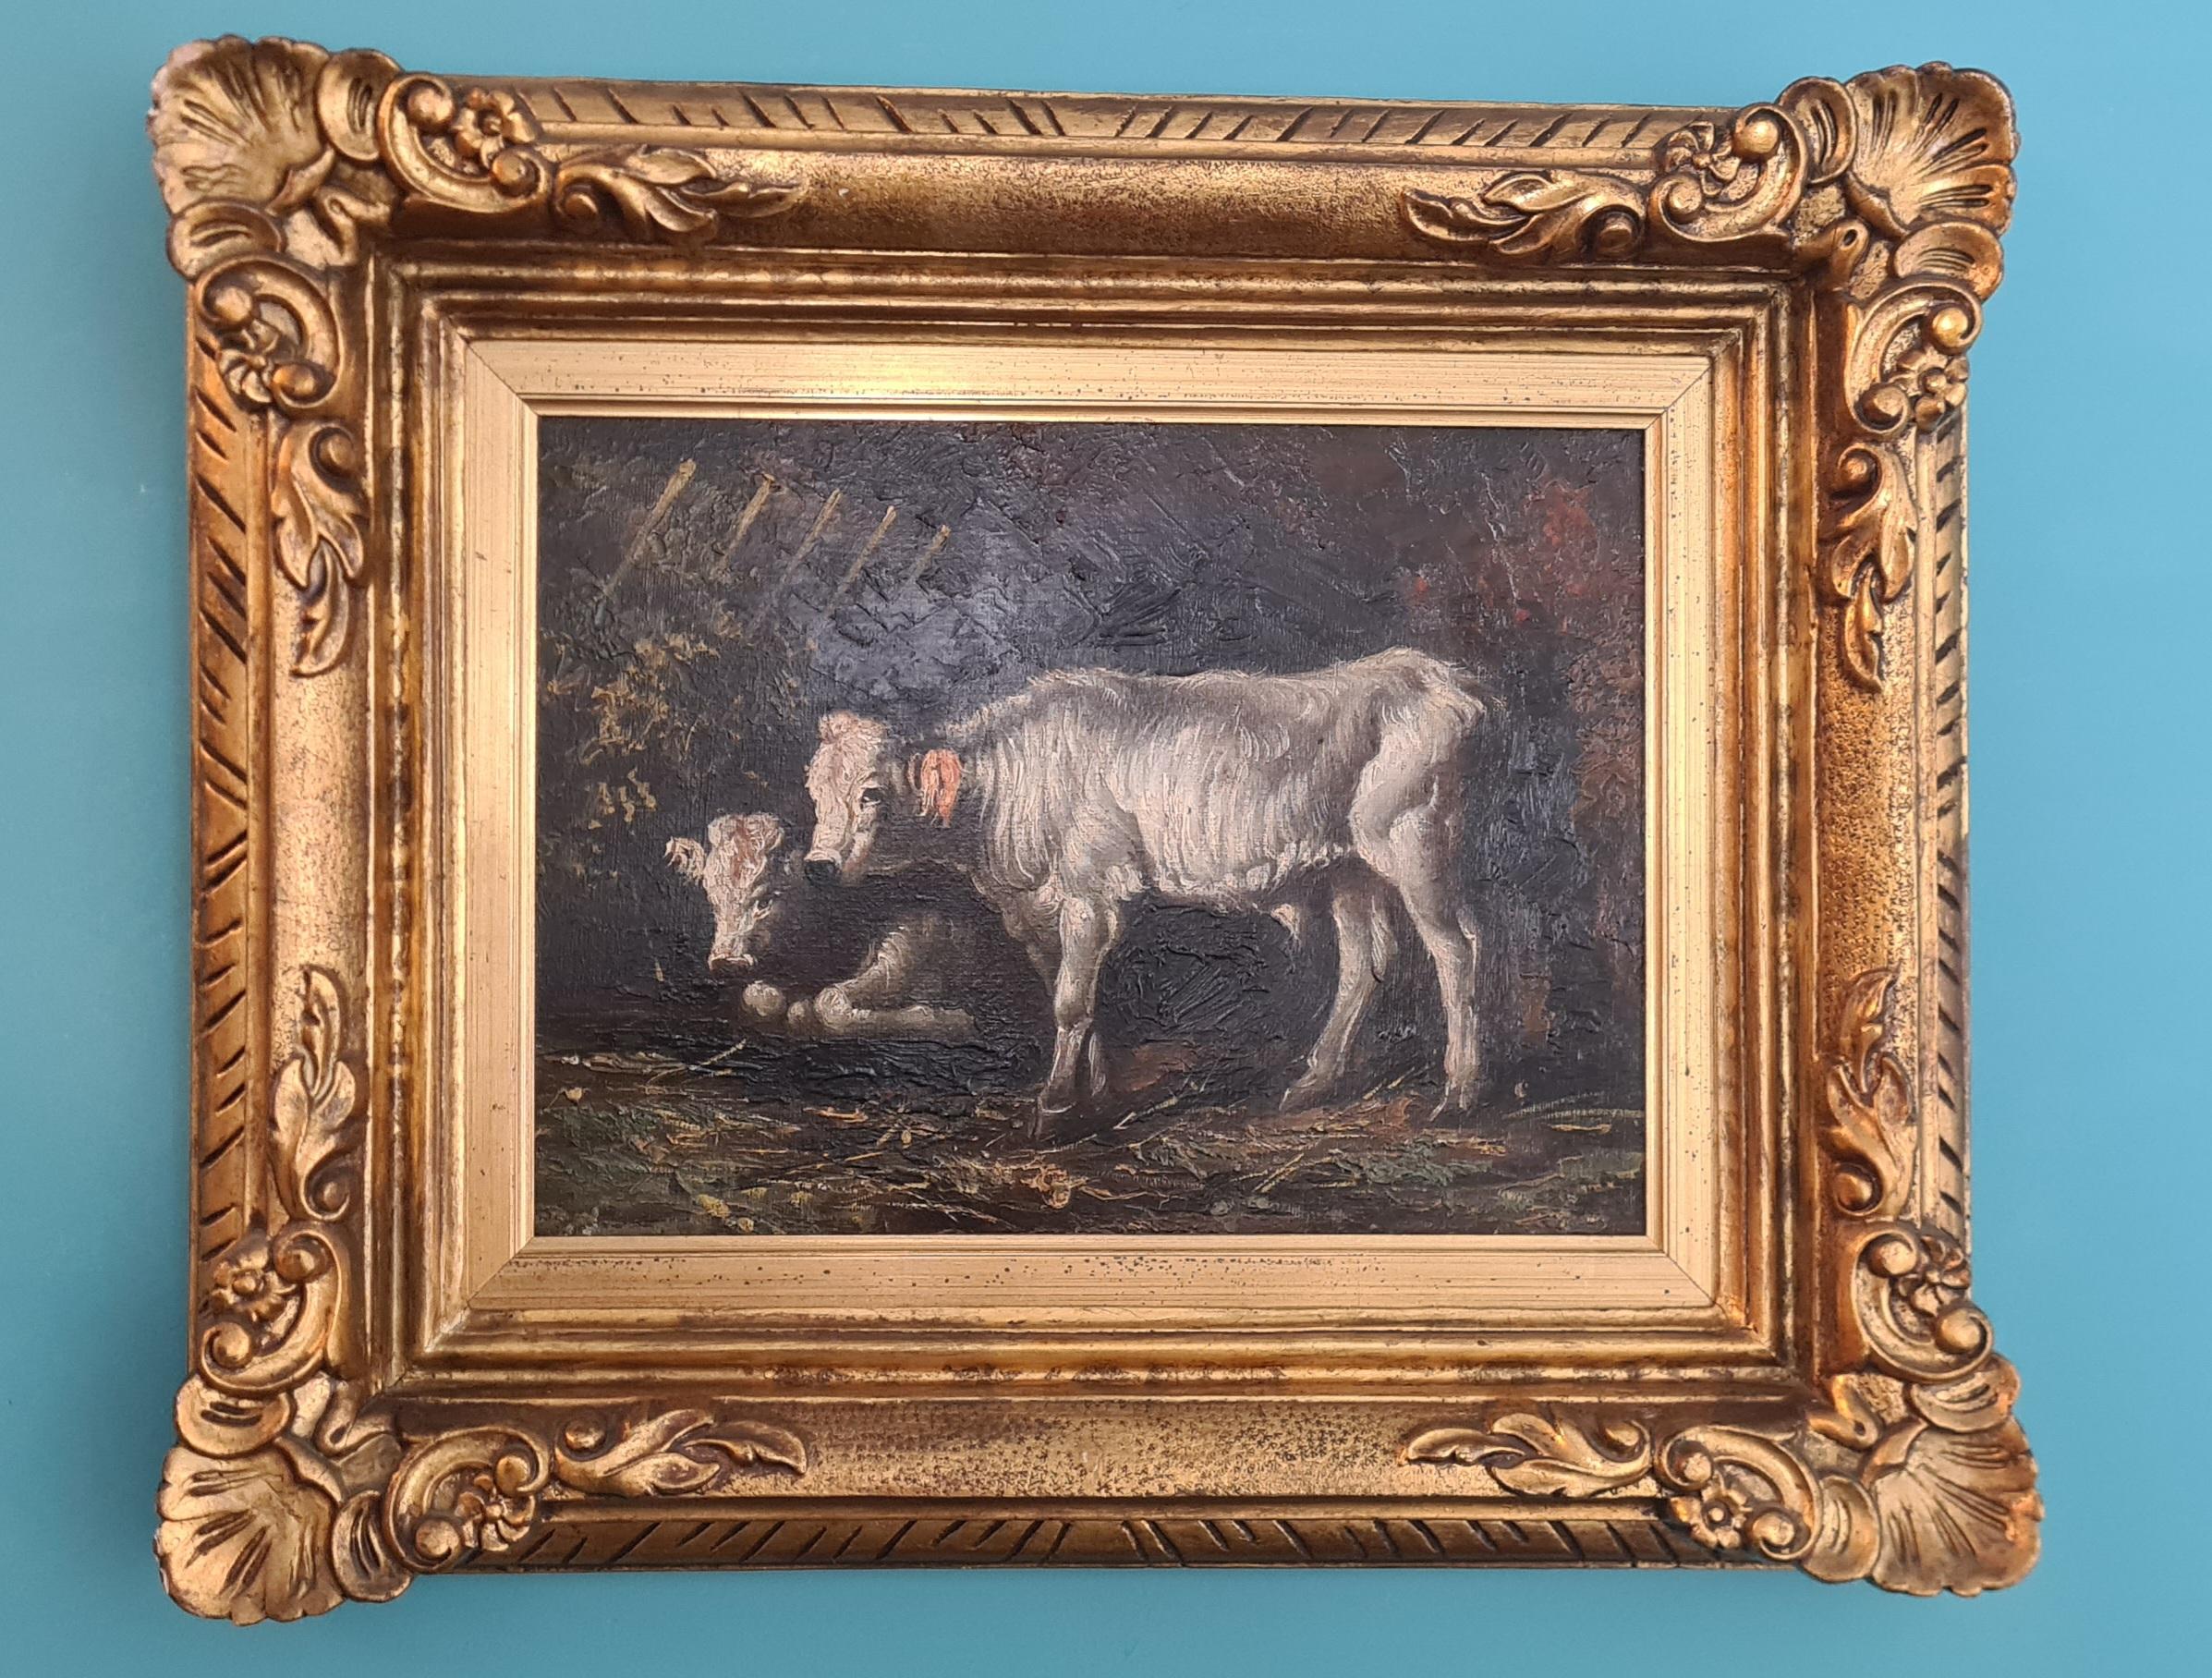 Oil painting on canvas depicting rural scene.

Rural scene depicting two white-coated cows one of which is lying down and the other standing surrounded by dark nature.

The painting is unsigned but can be placed, by the type of painting, in the